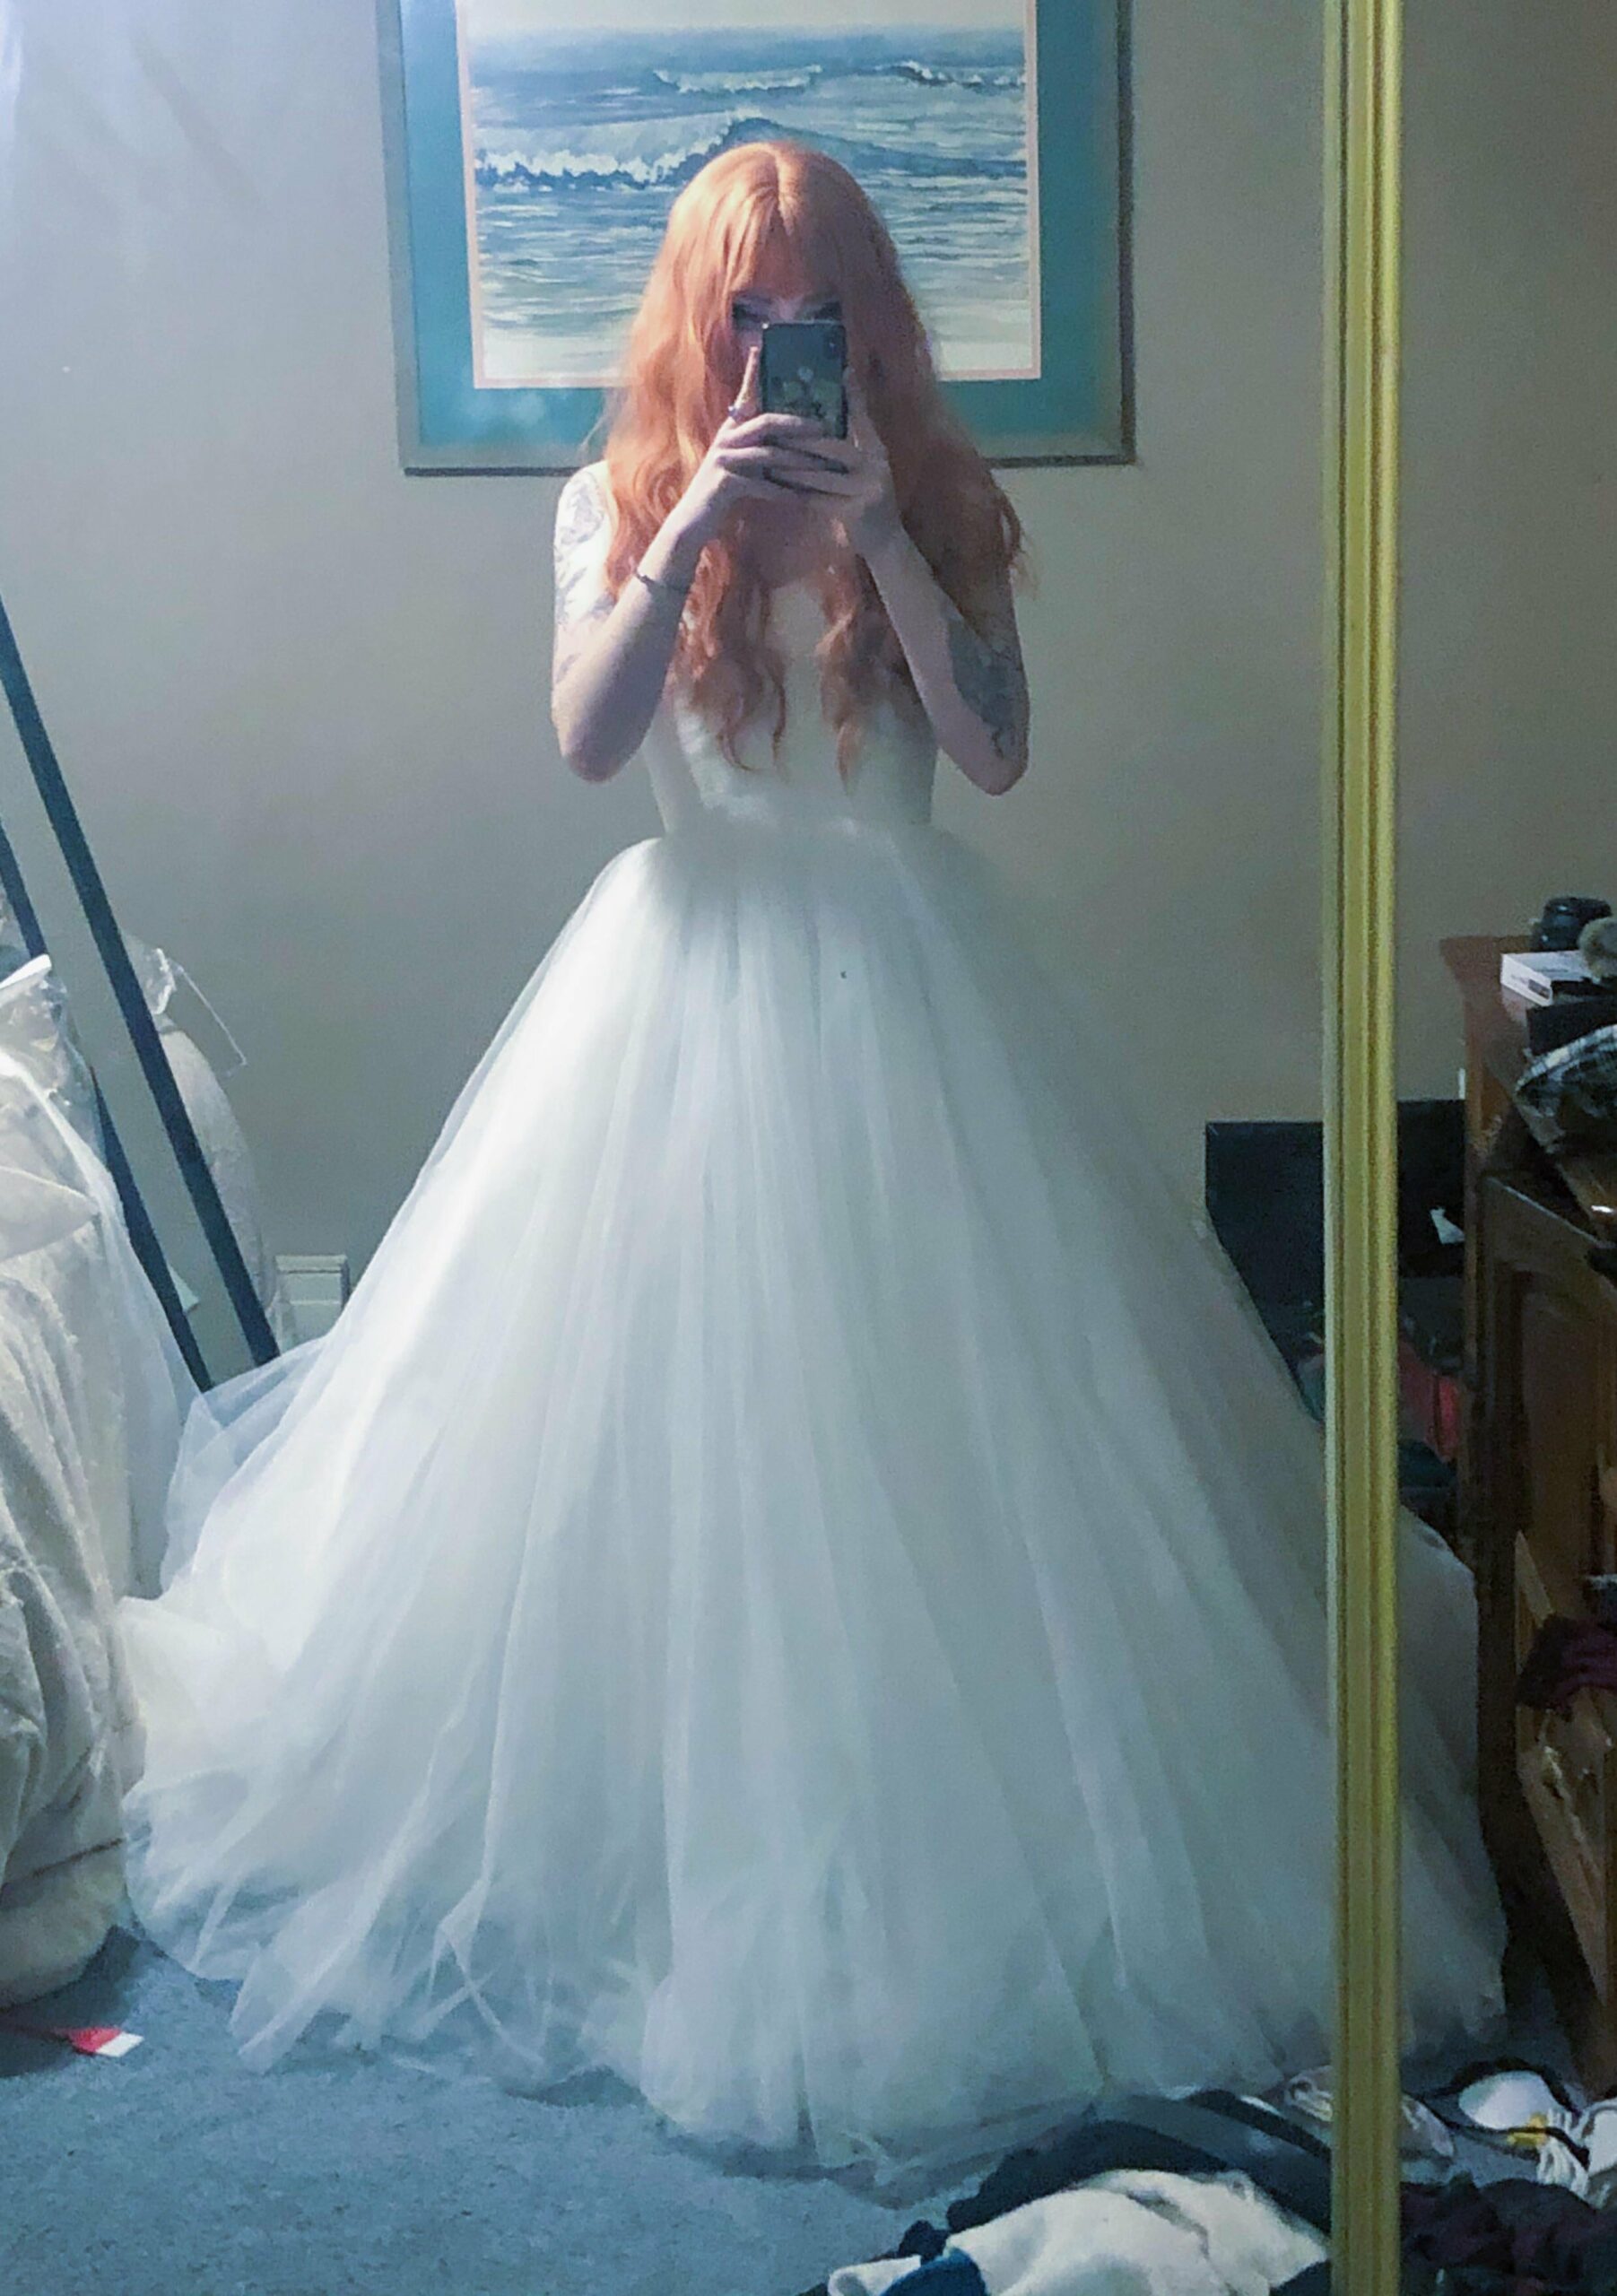 a woman with light orange hair taking a picture of herself in a mirror while wearing a wedding dress she purchased from goodwill